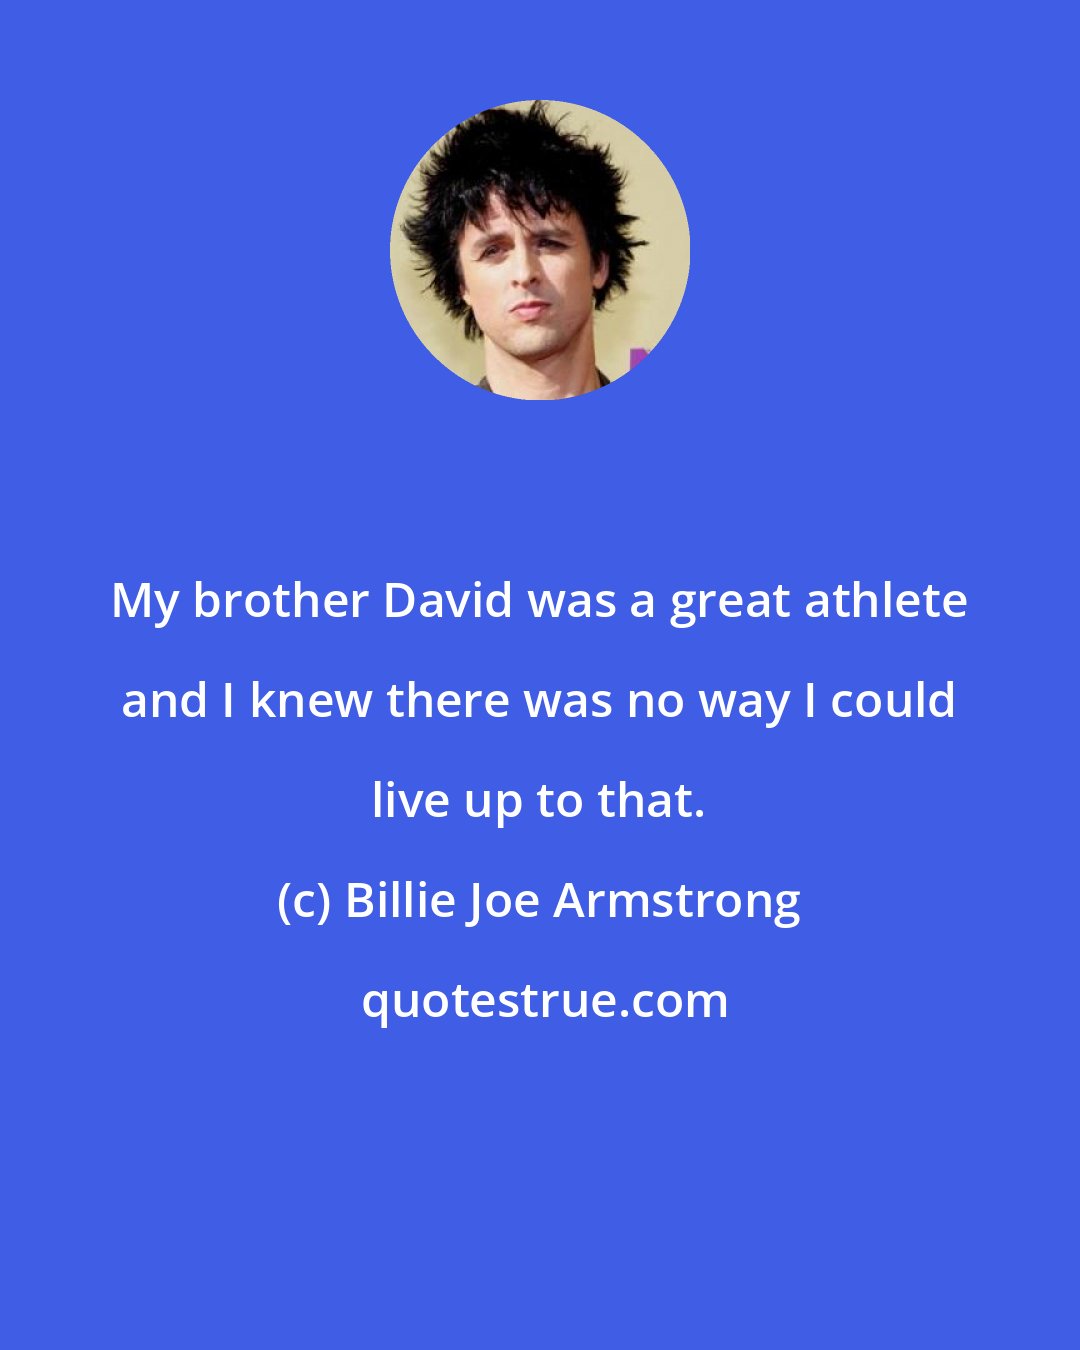 Billie Joe Armstrong: My brother David was a great athlete and I knew there was no way I could live up to that.